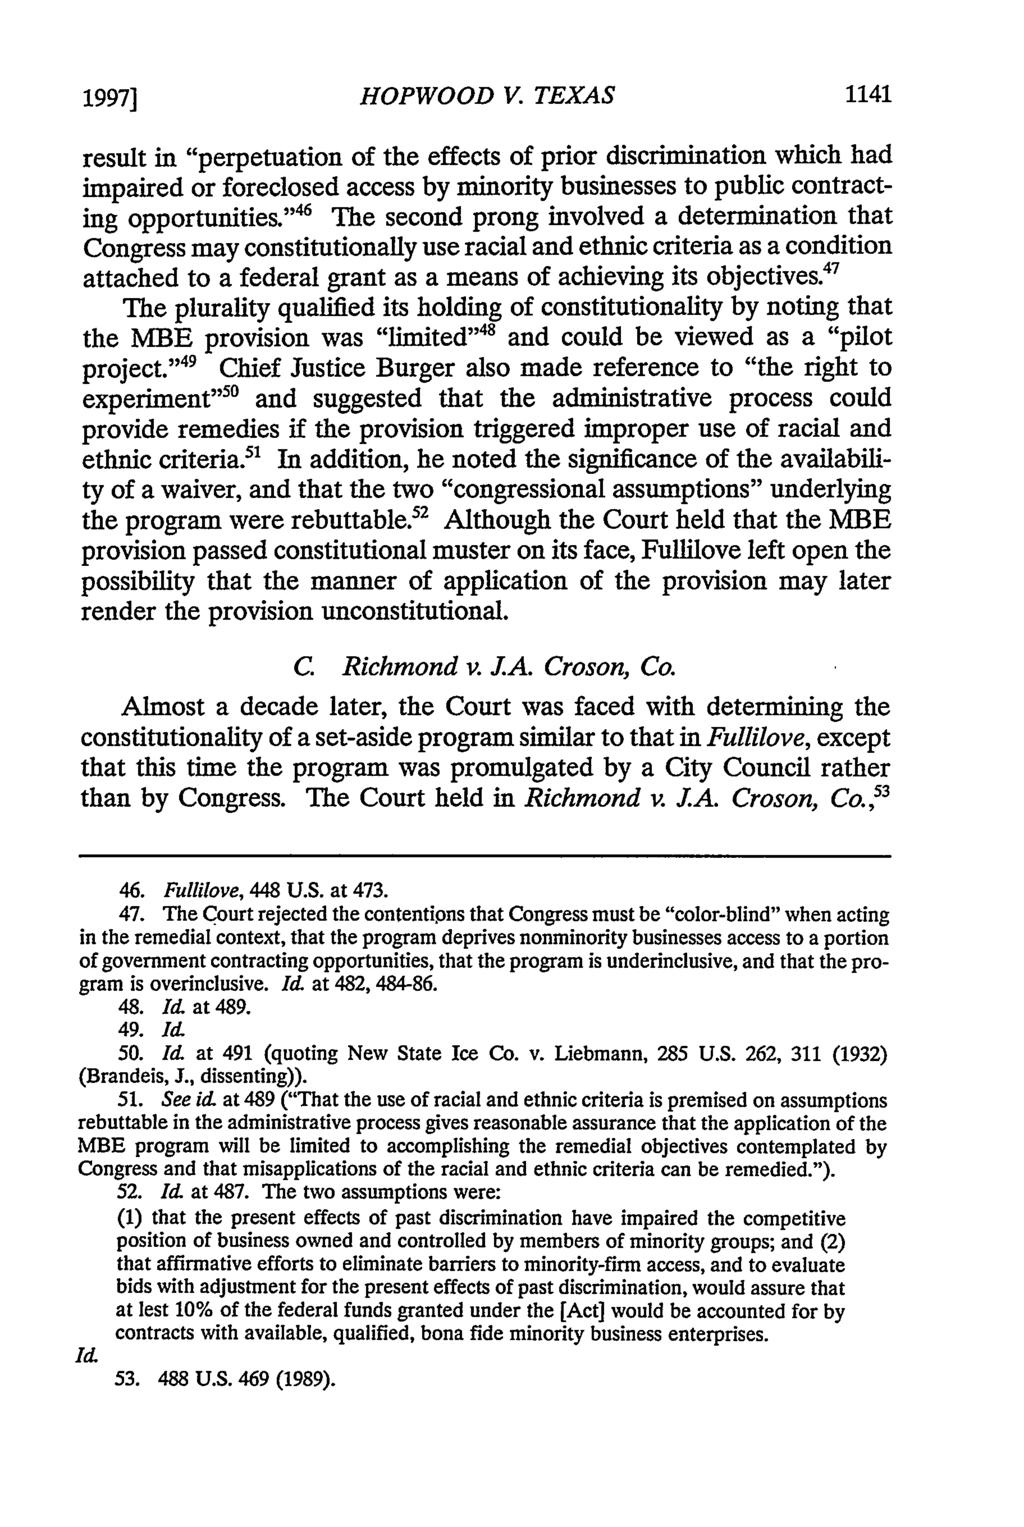 1997] HOPWOOD V. TEXAS result in "perpetuation of the effects of prior discrimination which had impaired or foreclosed access by minority businesses to public contracting opportunities.